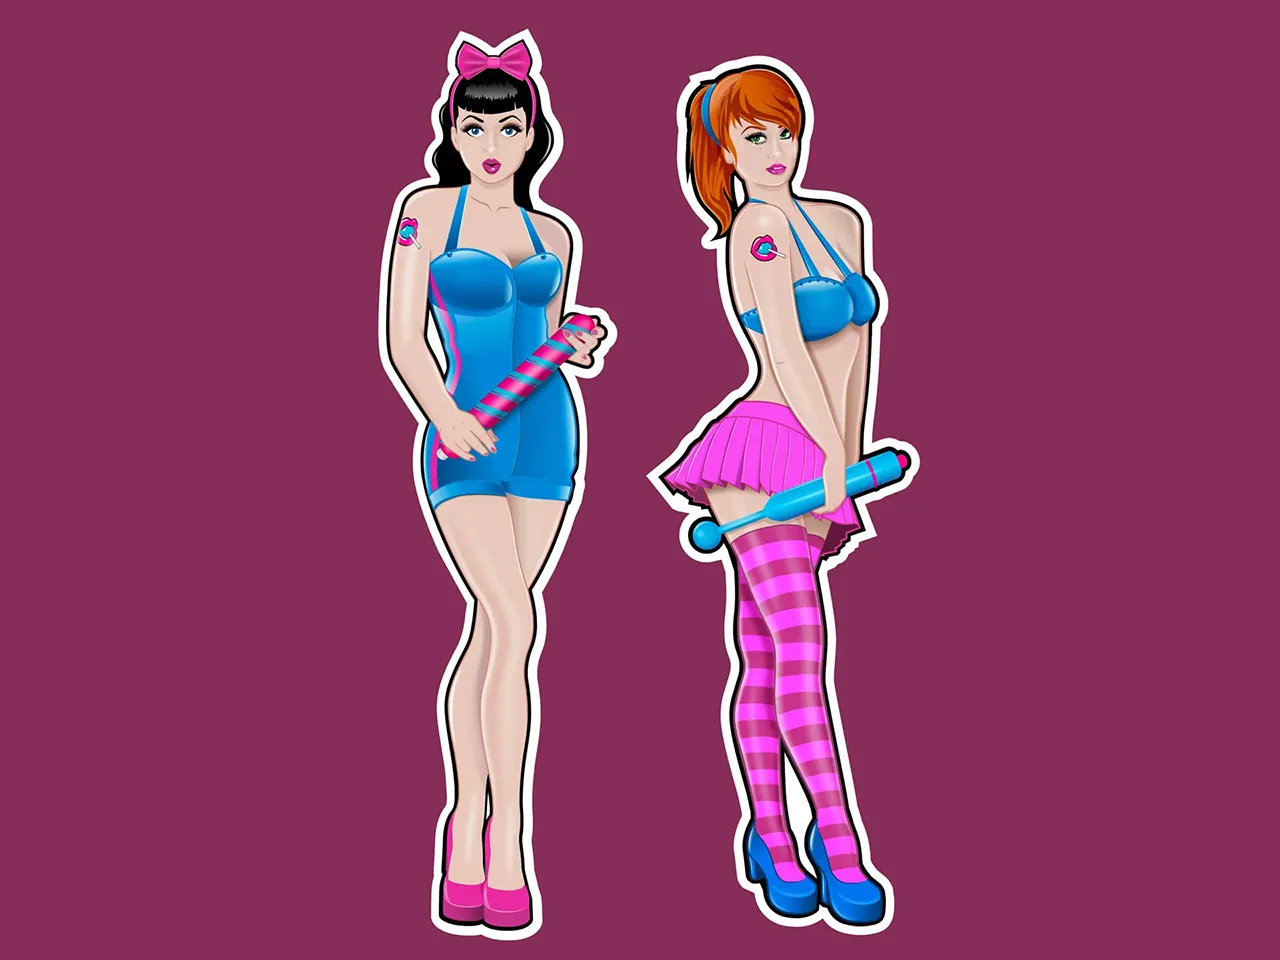 Rock Candy Toys cartoon illustration of 2 sexy woman posing